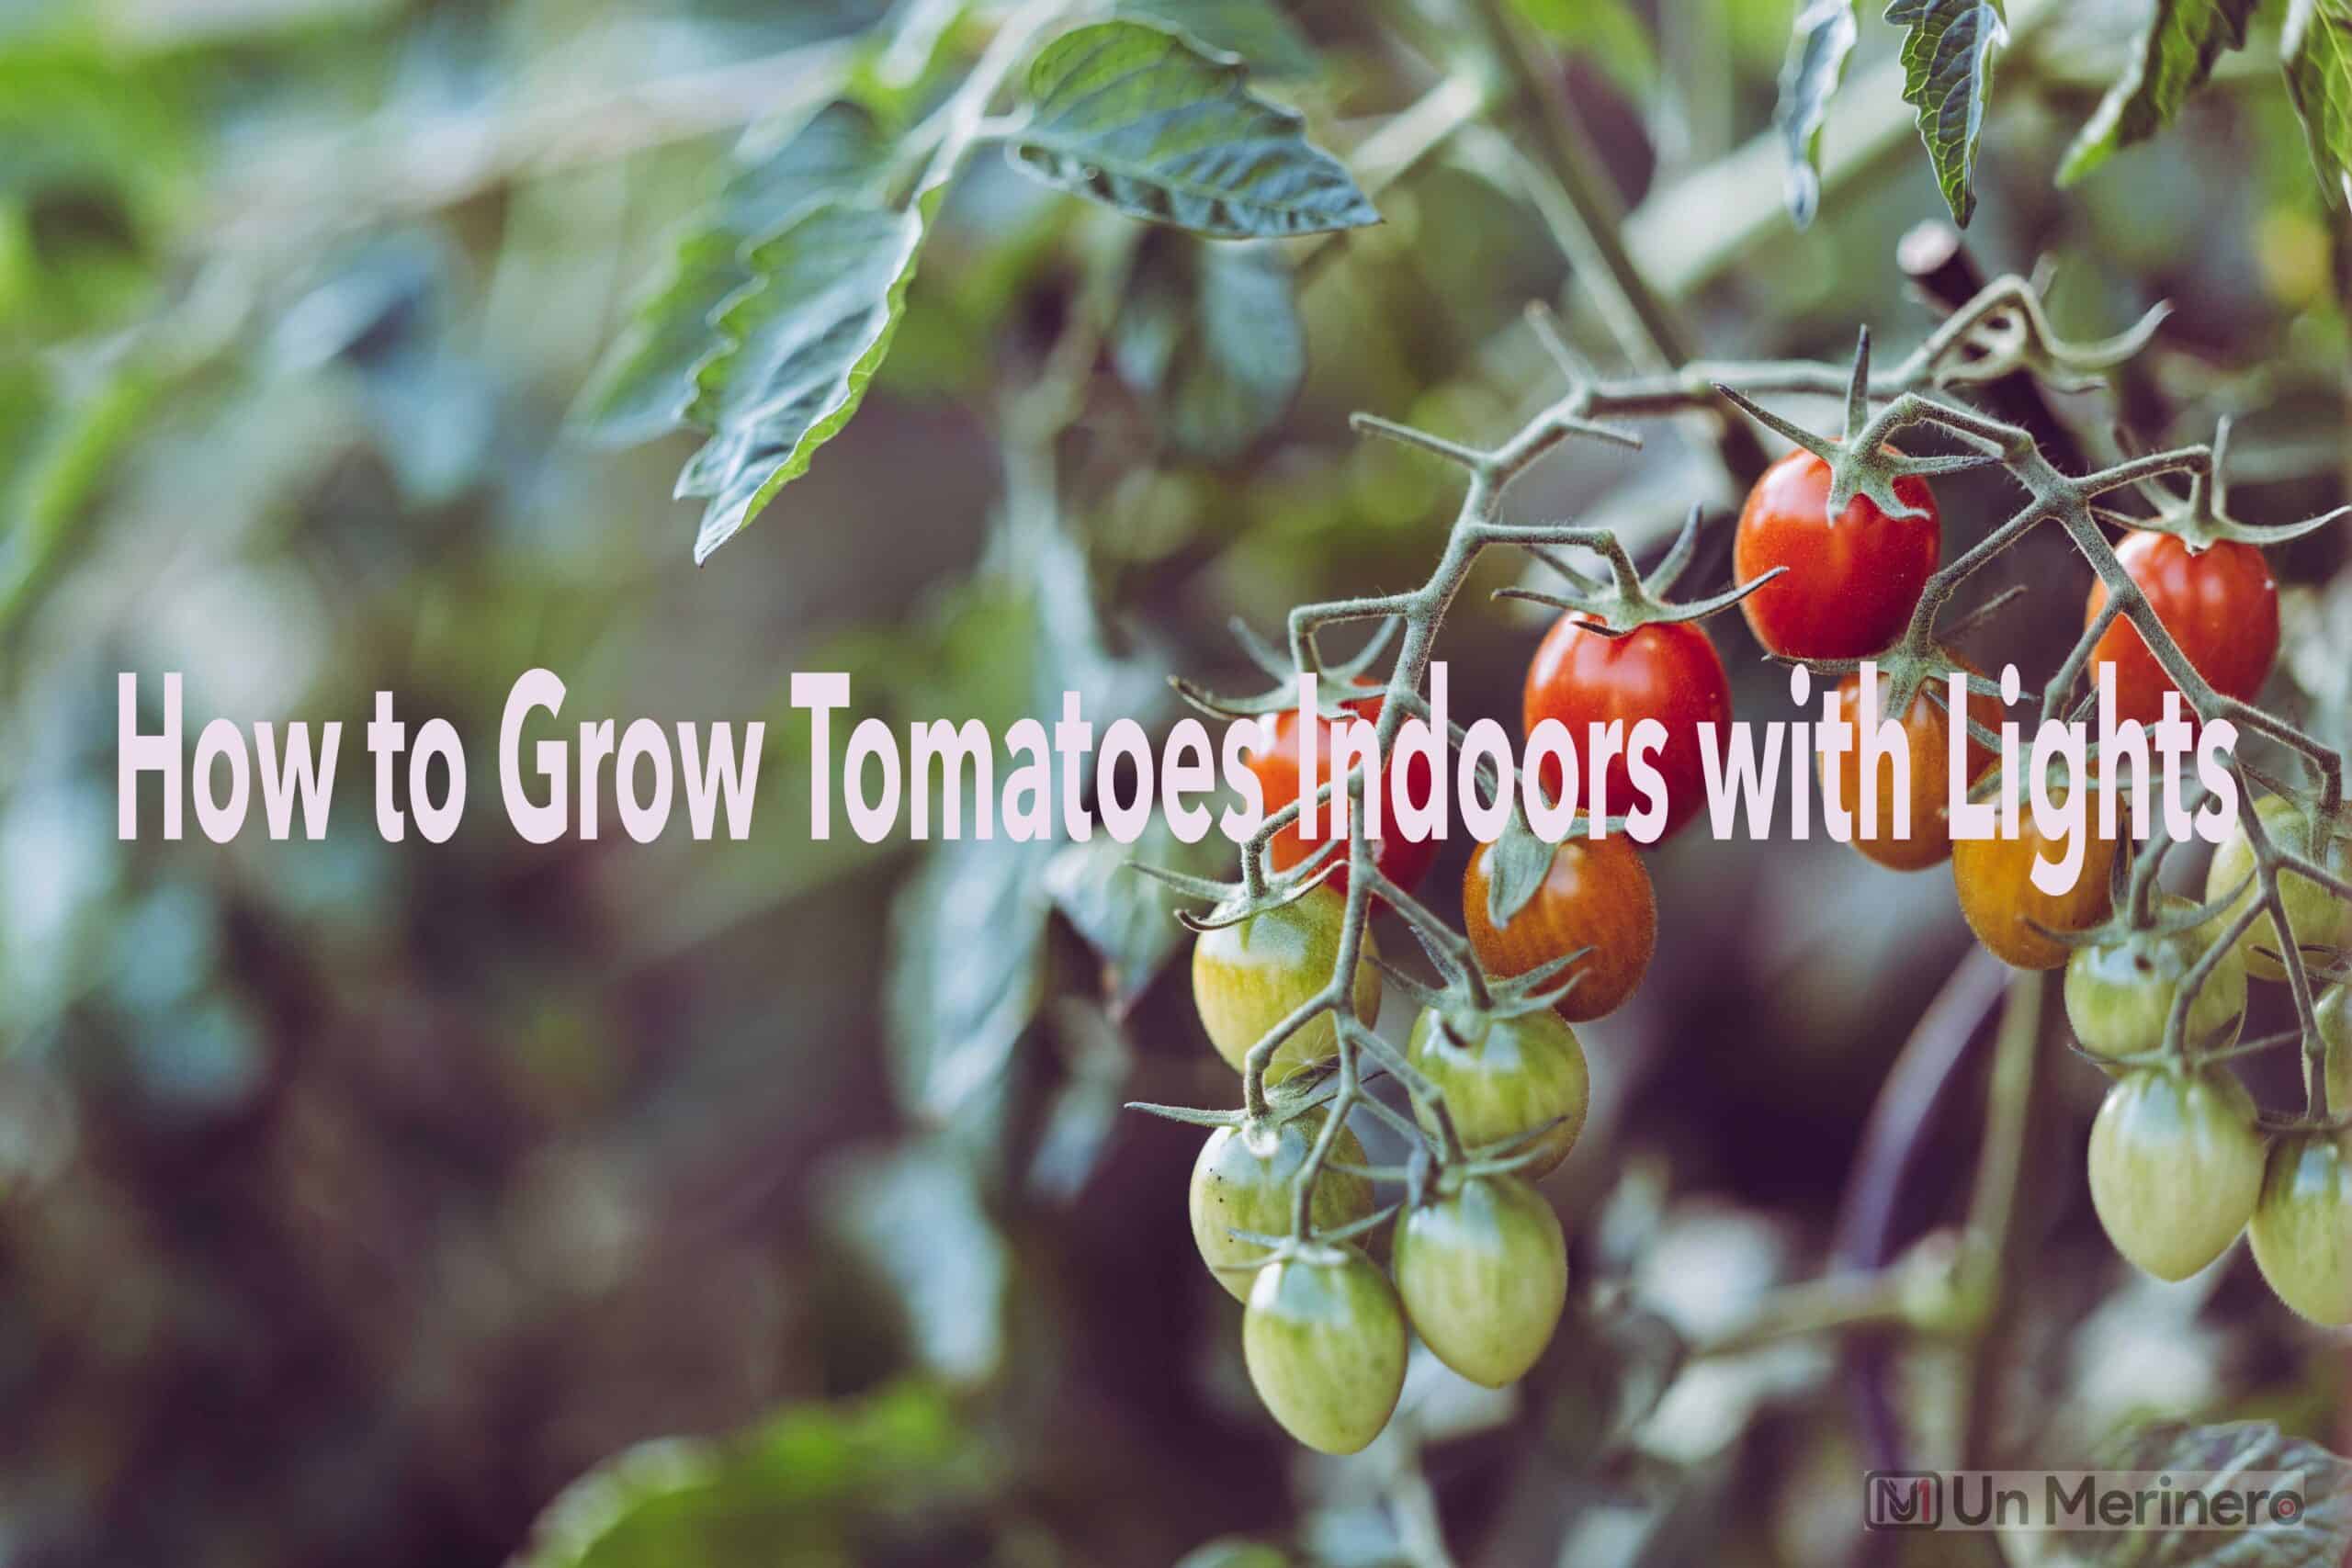 How to Grow Tomatoes Indoors with Lights